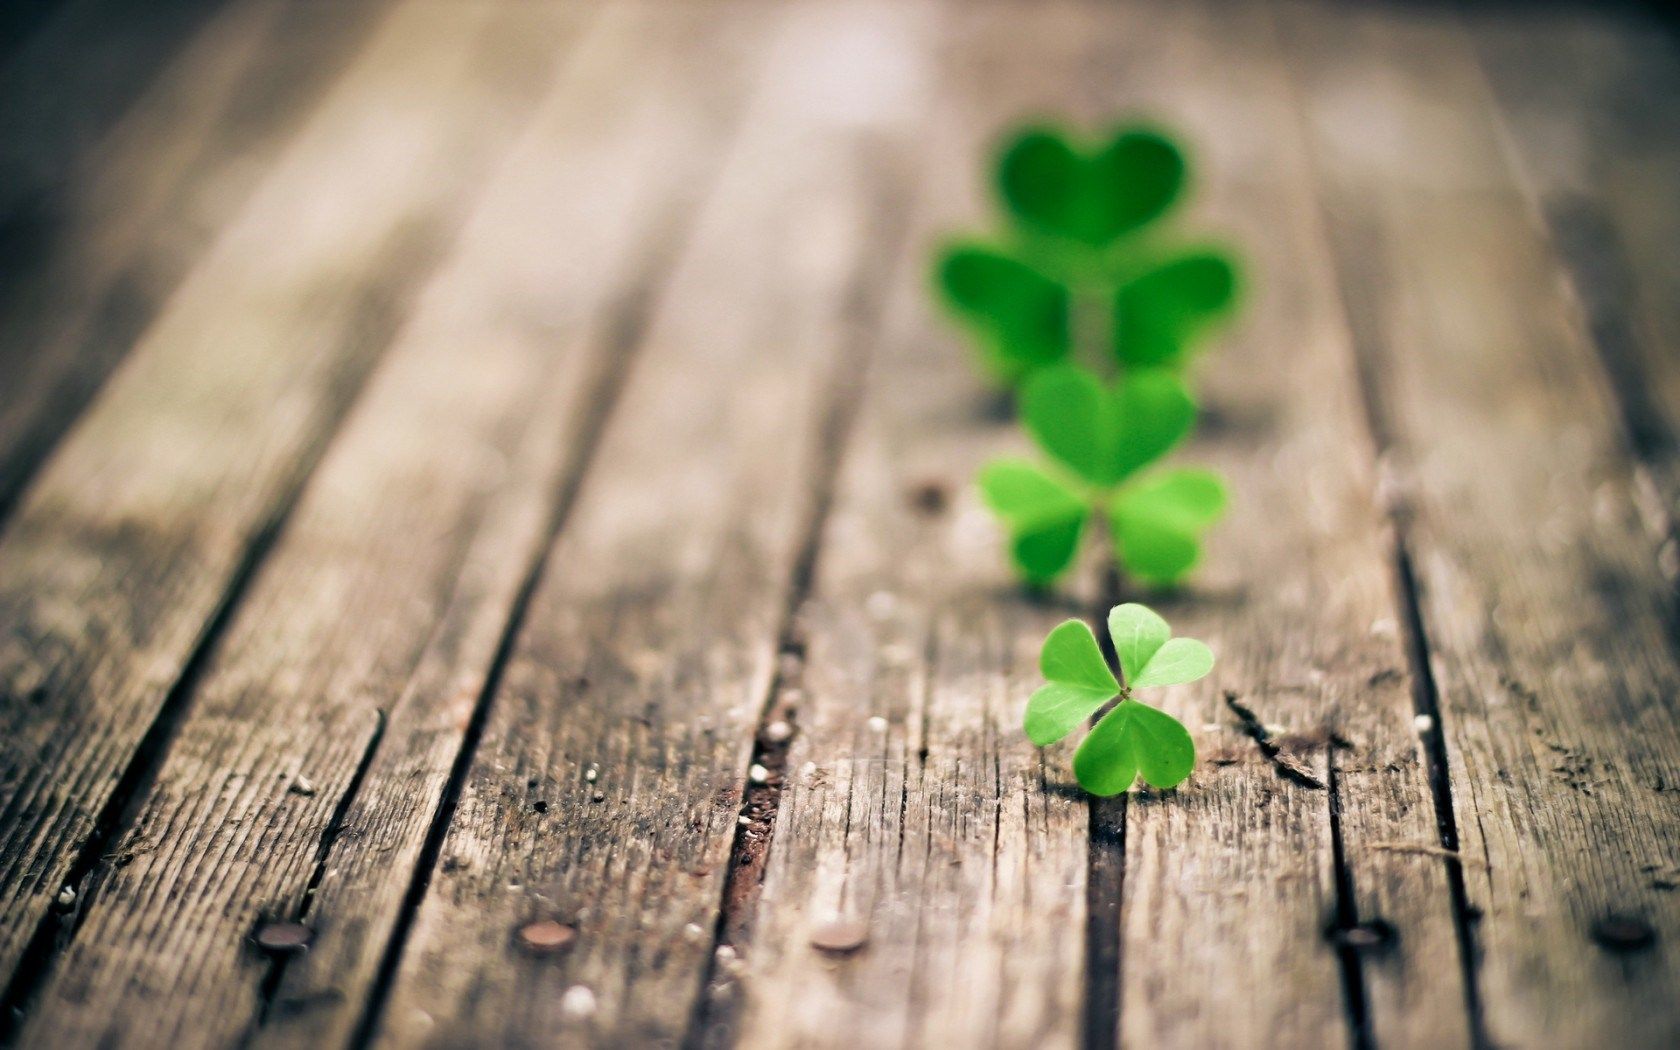 HD wallpaper, Pictures, Clover